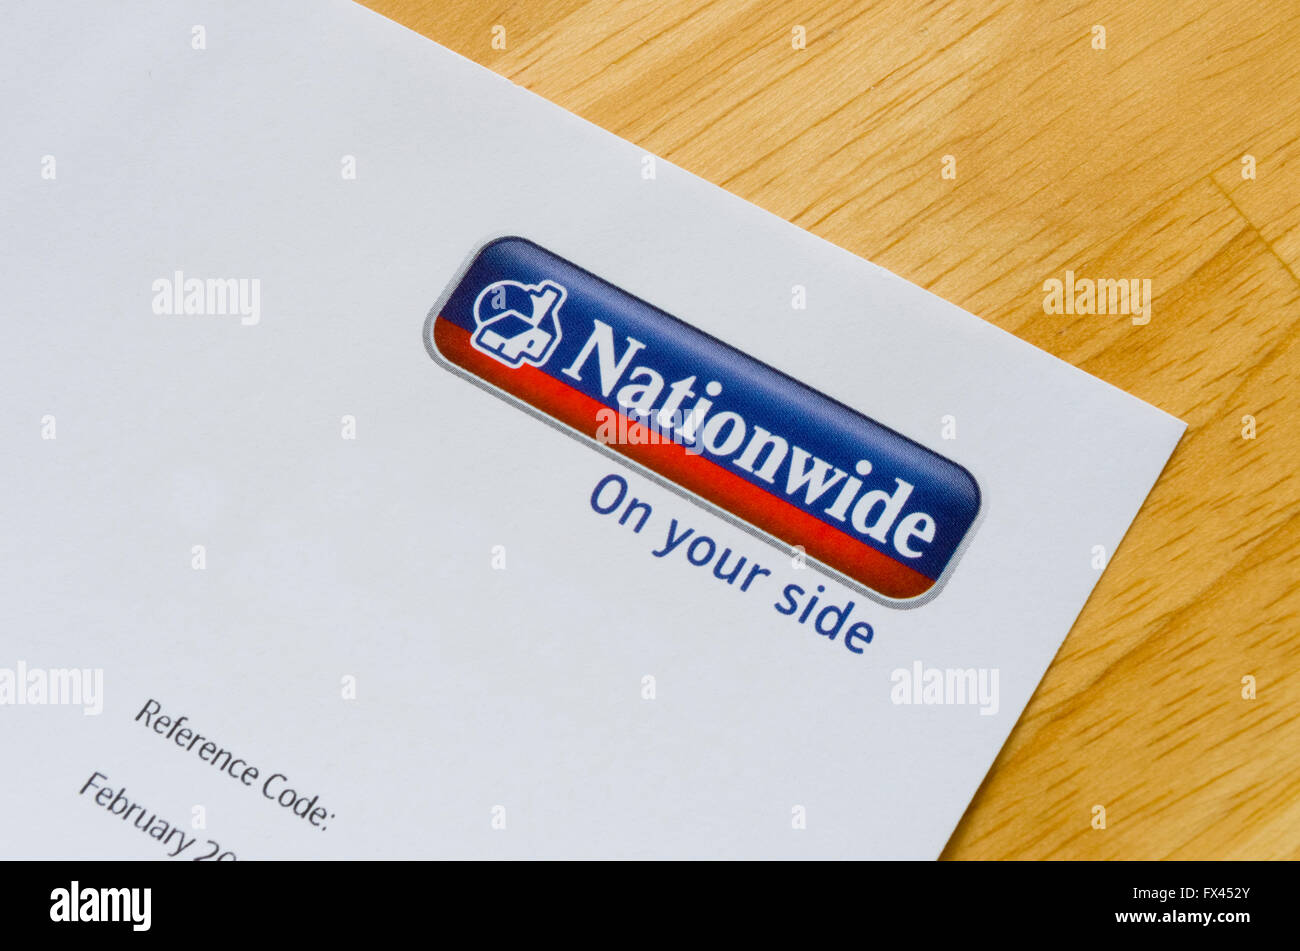 Nationwide Building Society Letterhead on a Wooden Background, UK Stock Photo